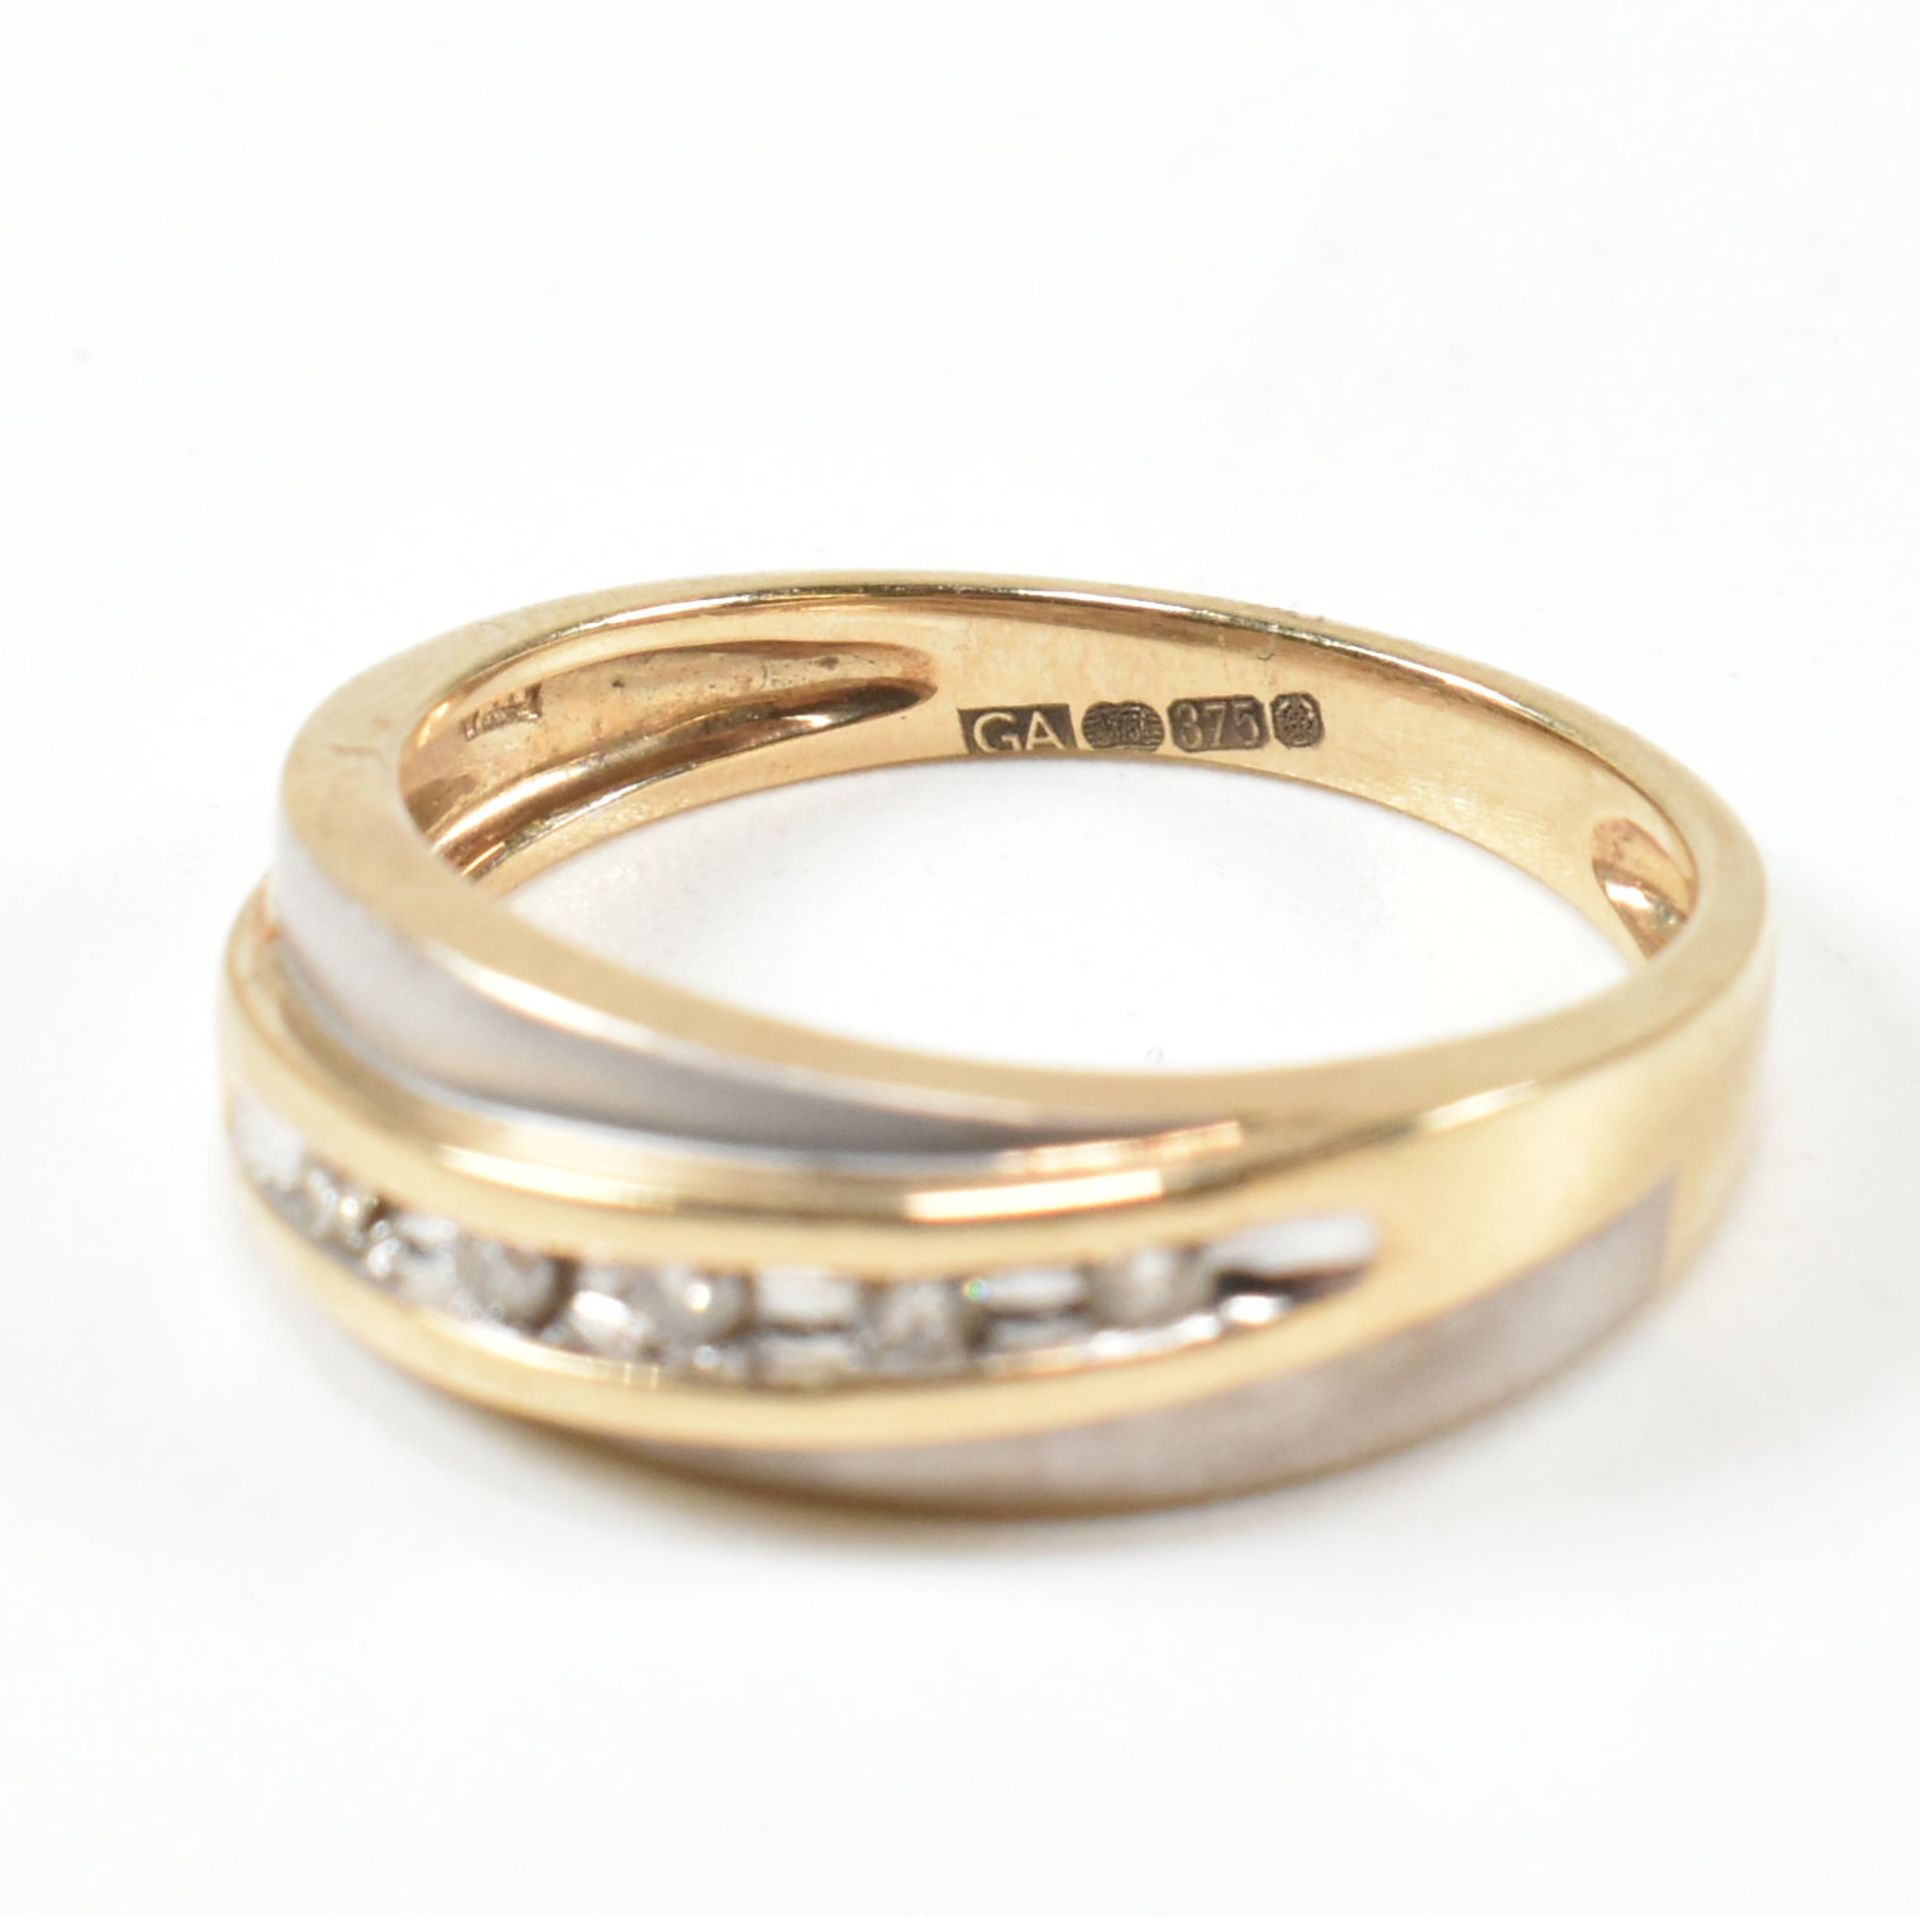 HALLMARKED 9CT GOLD & DIAMOND TWO TONE BAND RING - Image 9 of 9